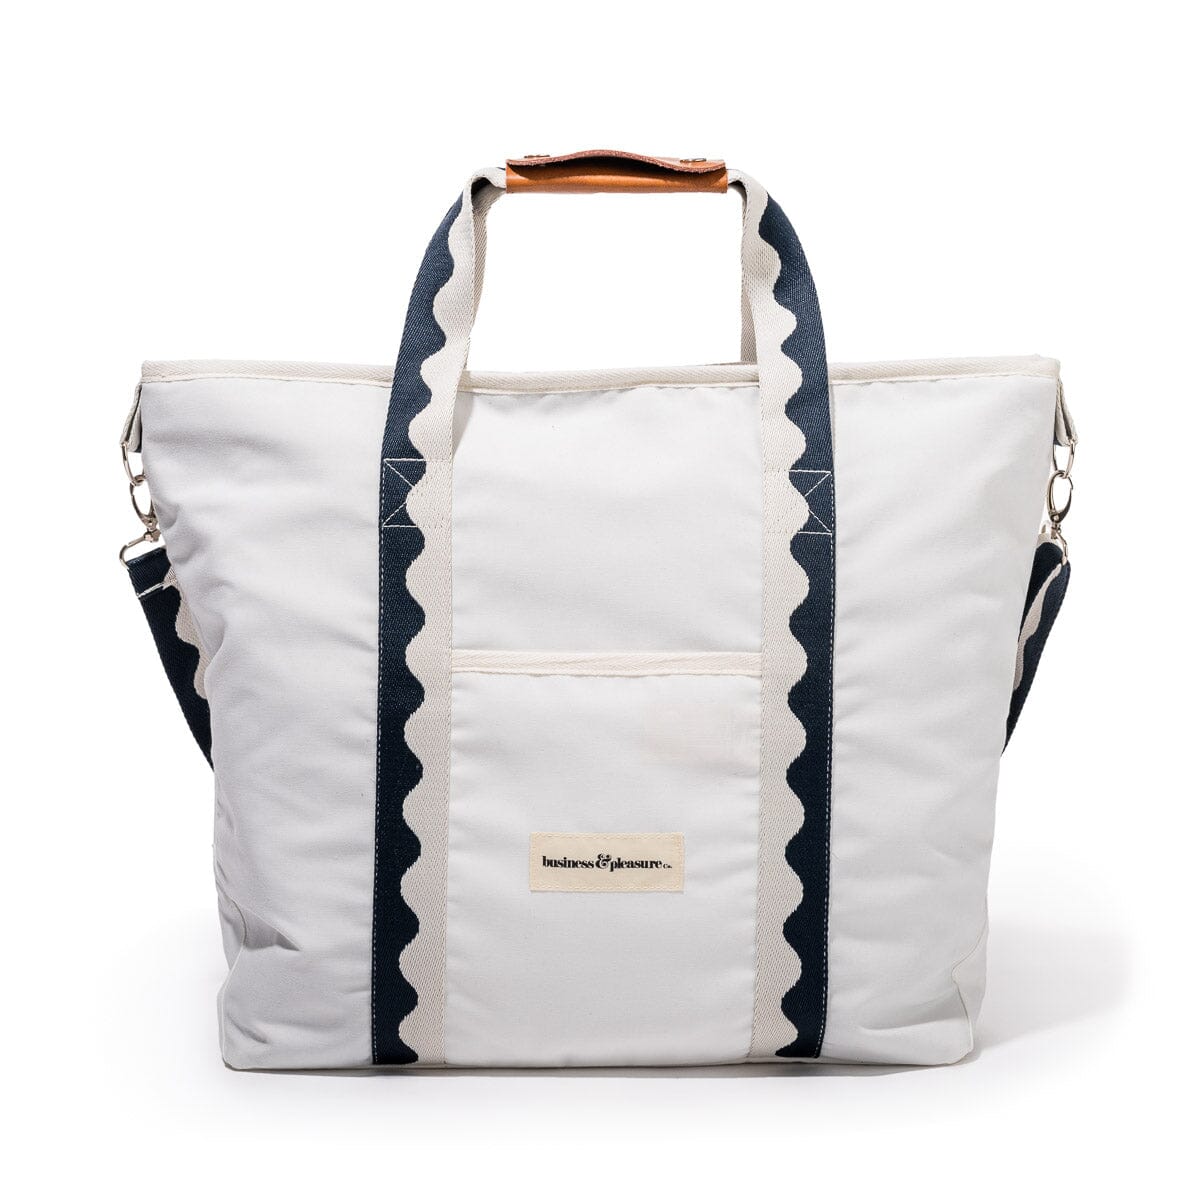 The Cooler Tote Bag - Rivie White Cooler Tote Business & Pleasure Co Aus 